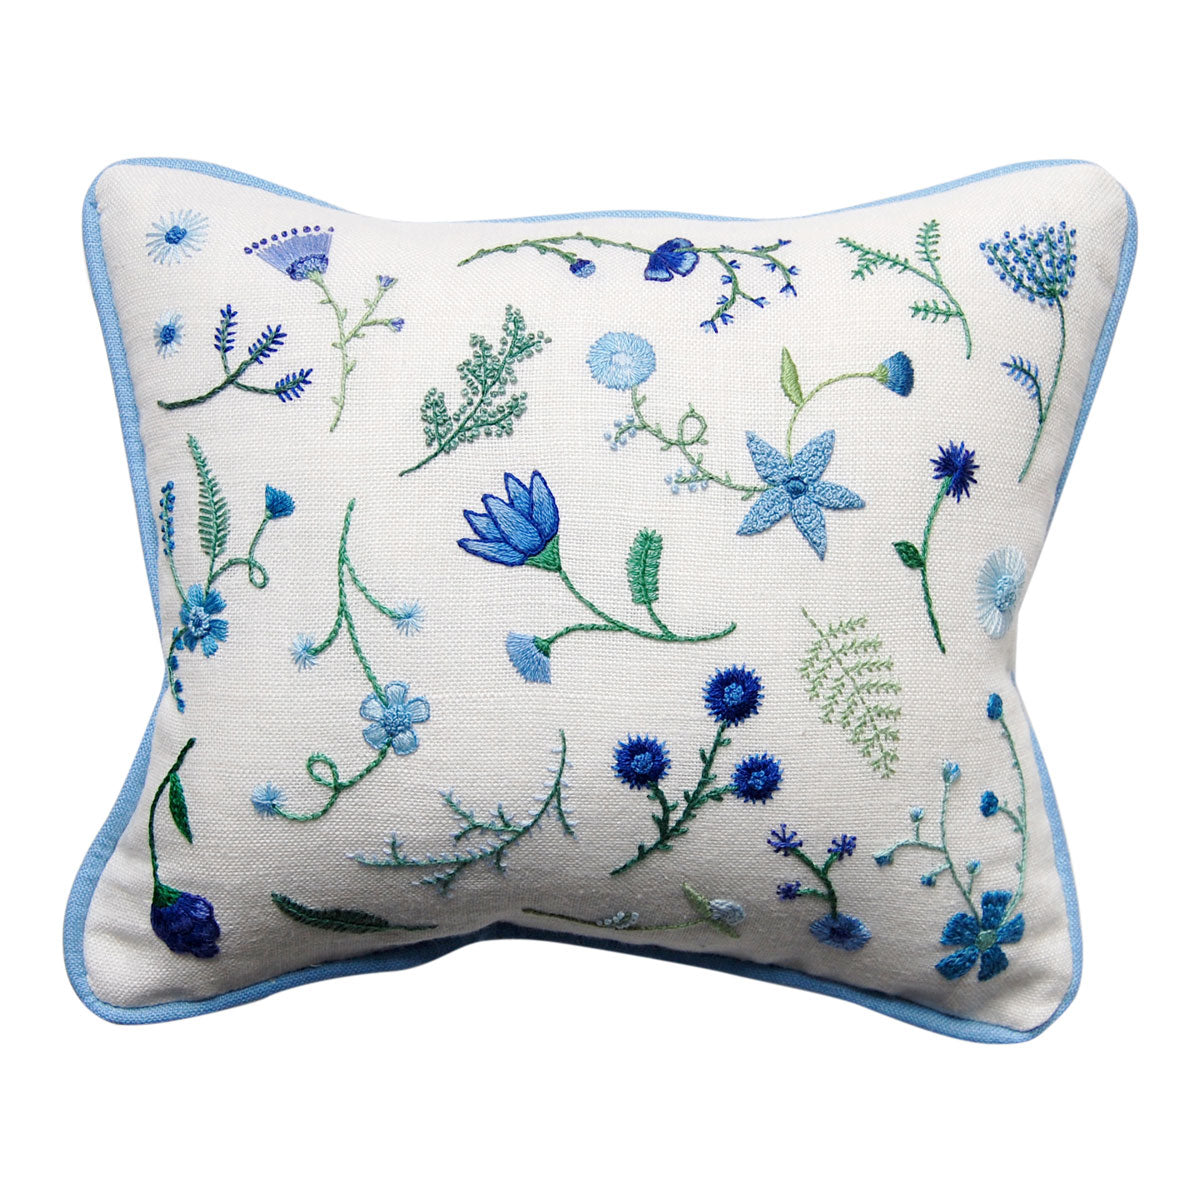 Hand Embroidered Blue Flowers with Green Stems Pillow